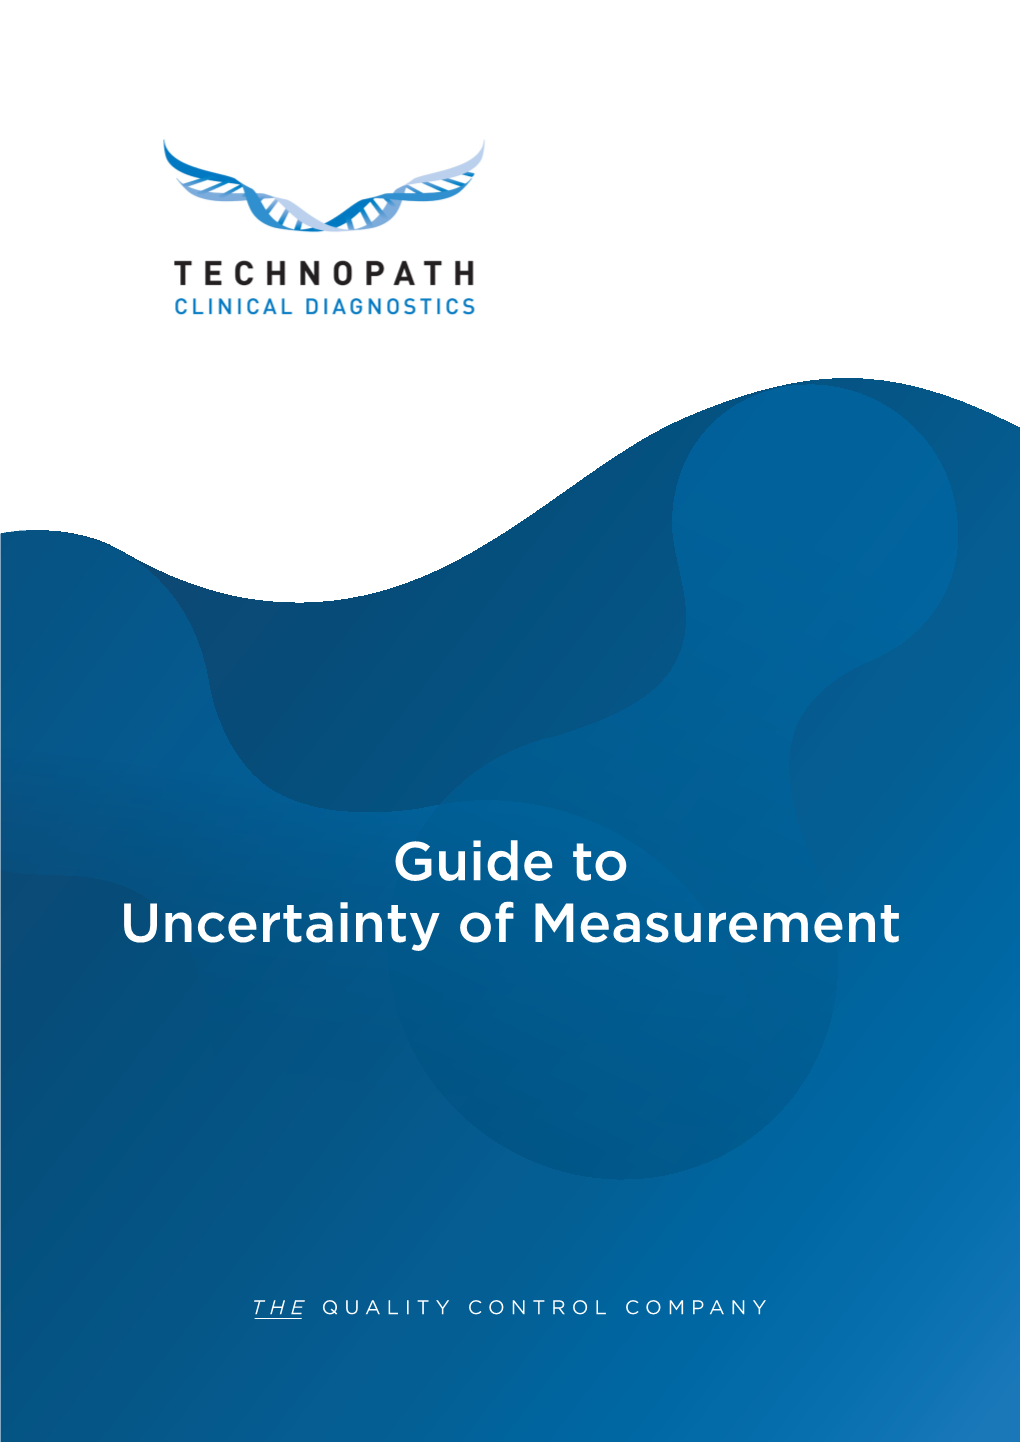 Guide to Uncertainty of Measurement Contents